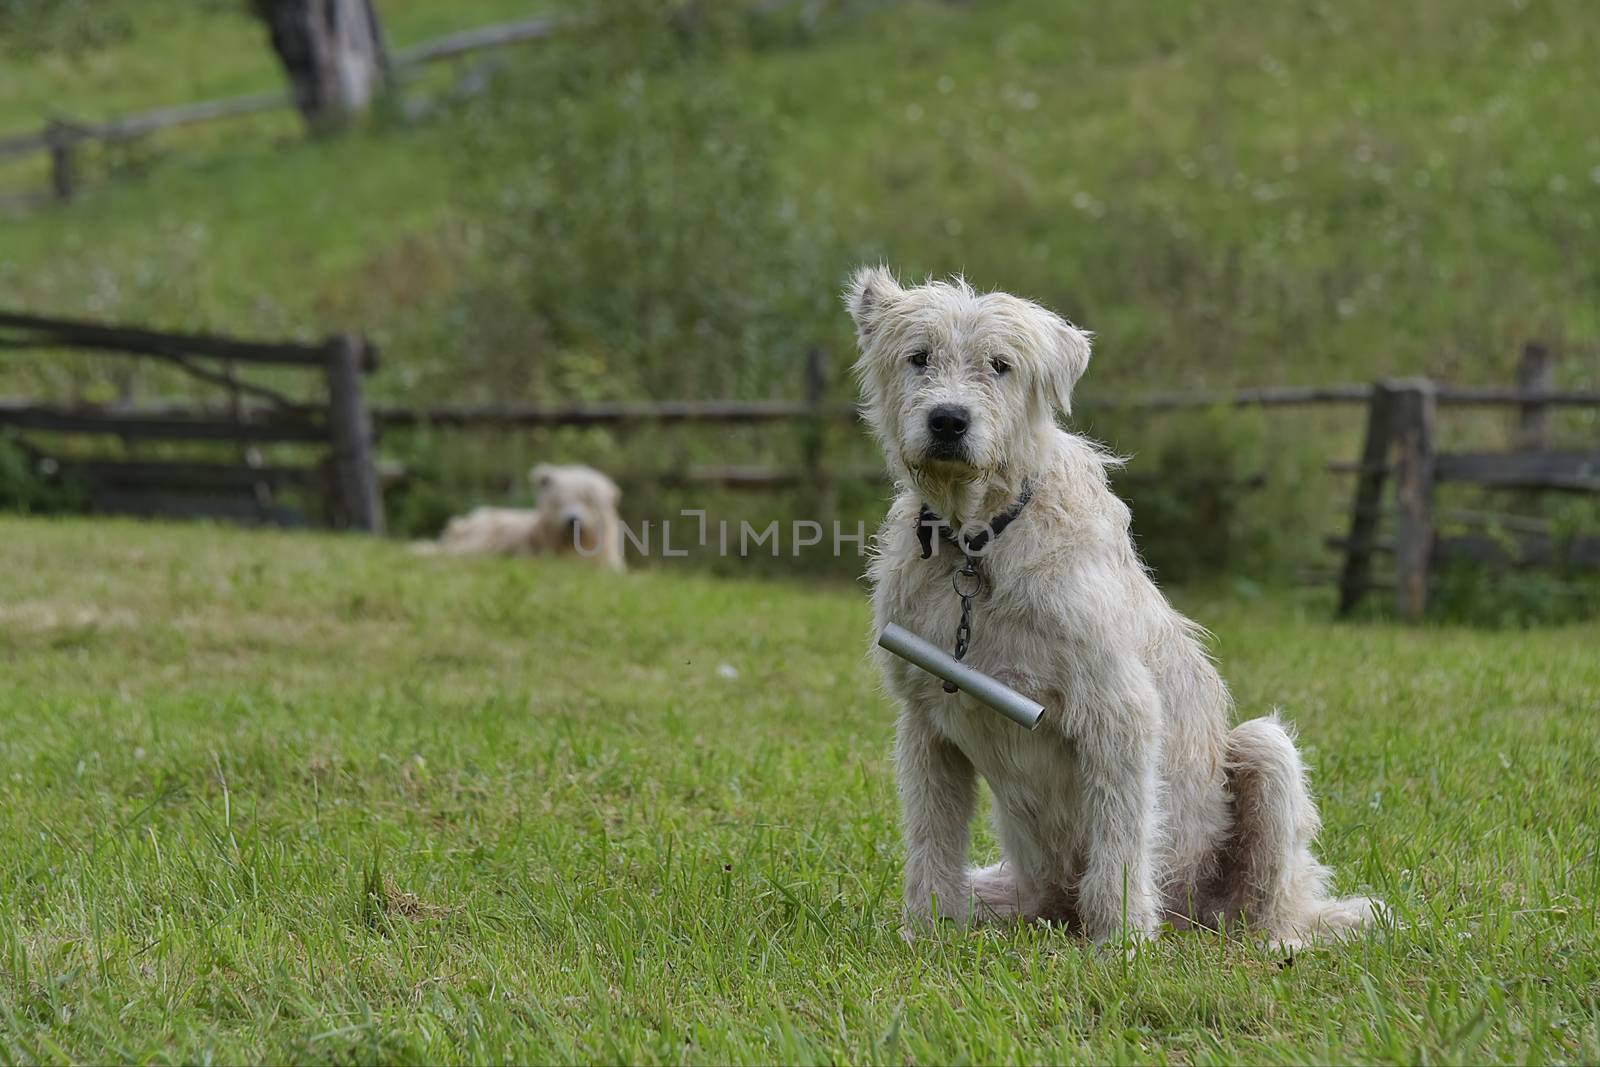 Brasov, Romania - Aug 2019:  The Romanian Mioritic Shepherd Dog is a large breed of livestock guardian dog that originated in the Carpathian Mountains of Romania